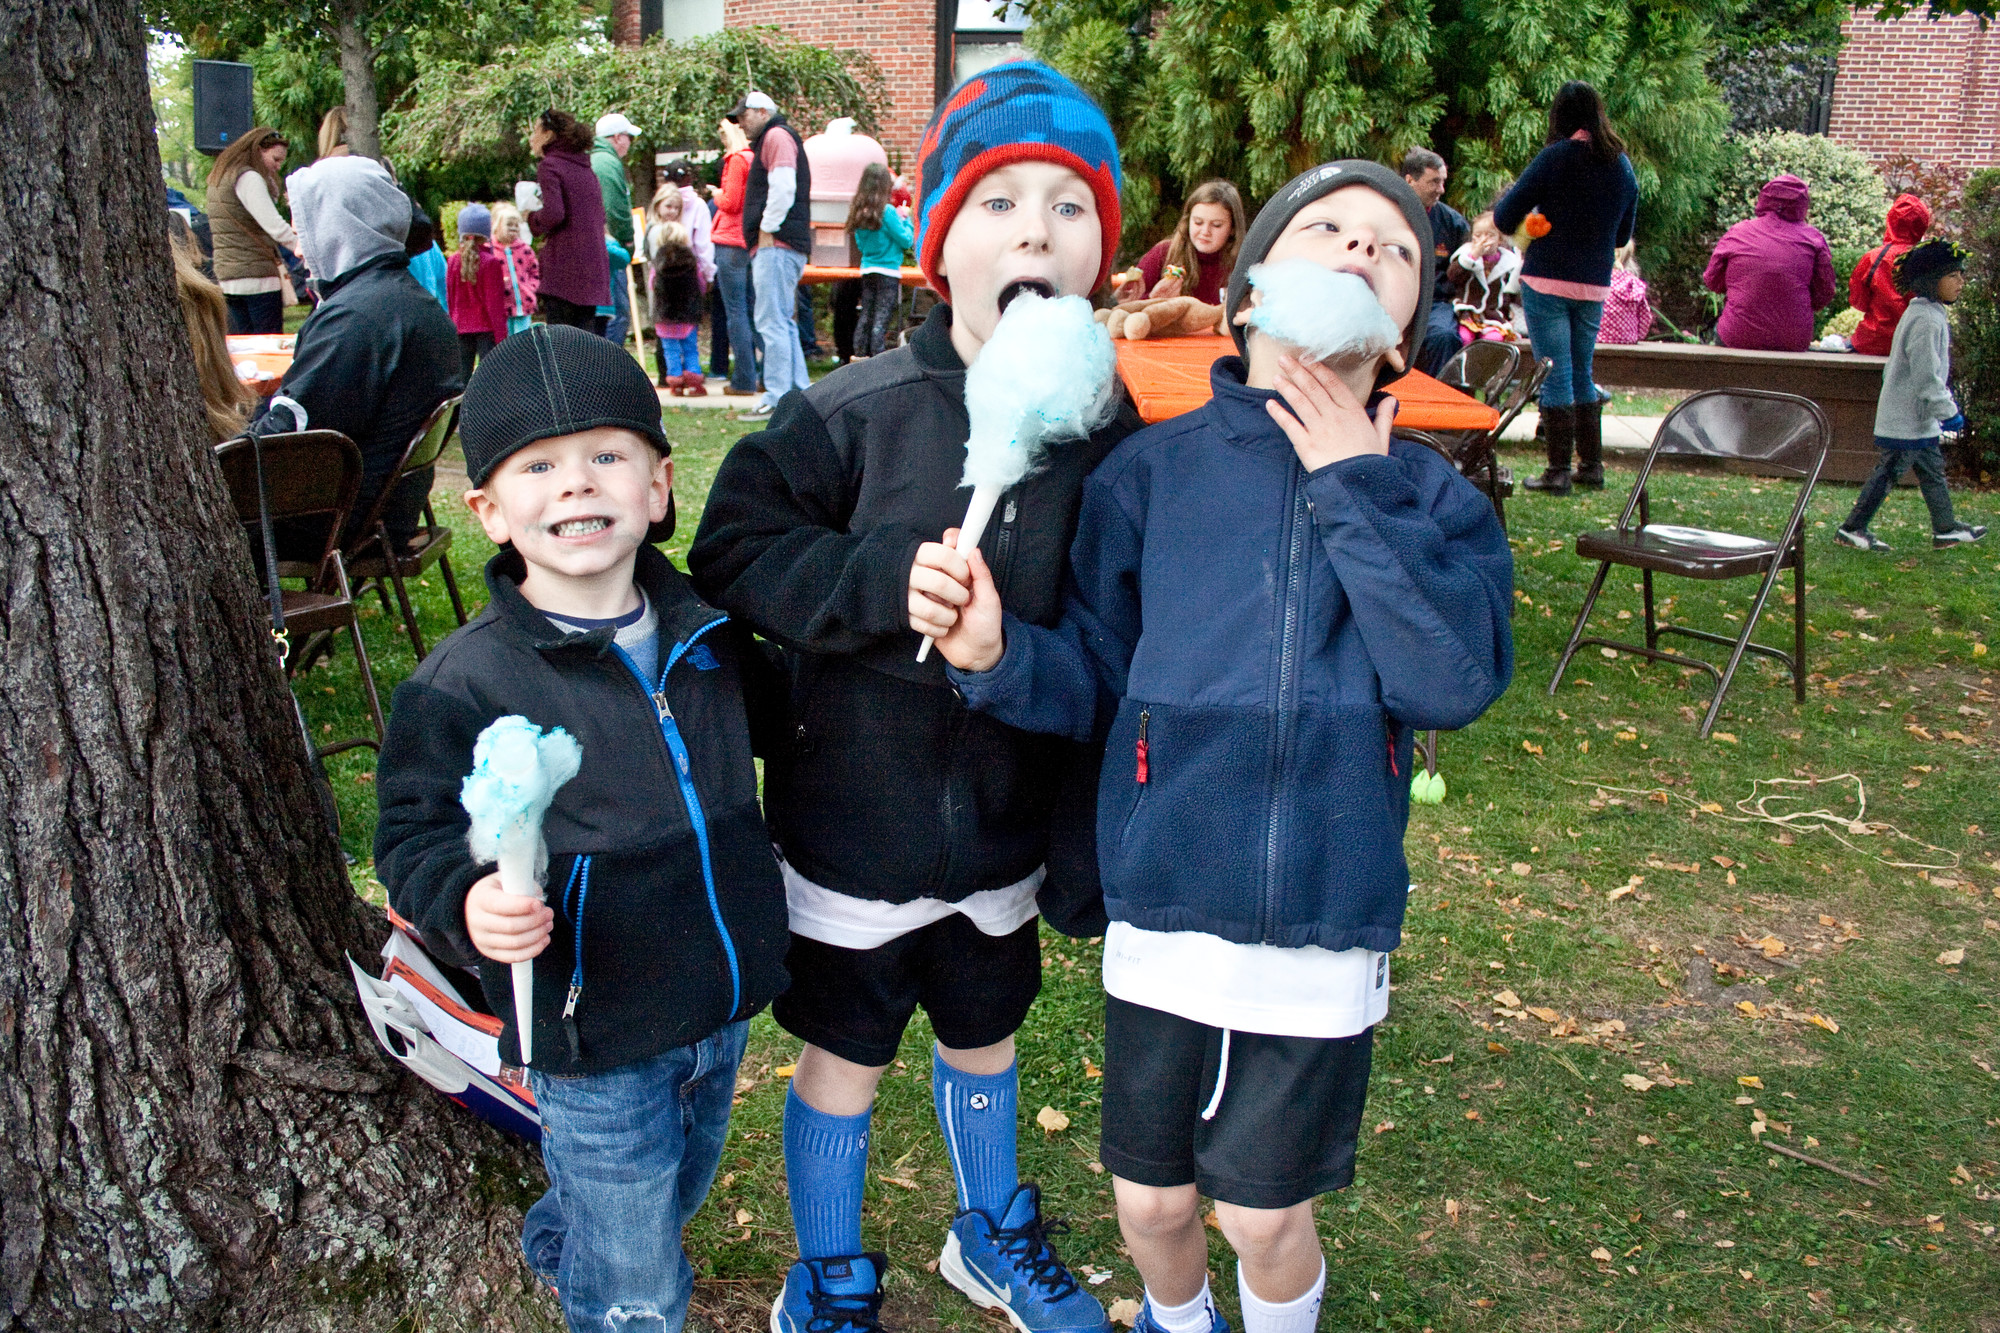 Jack Morin and his brother Gavin, along with their friend Luca Iacobellis, chomped down on some cotton candy.